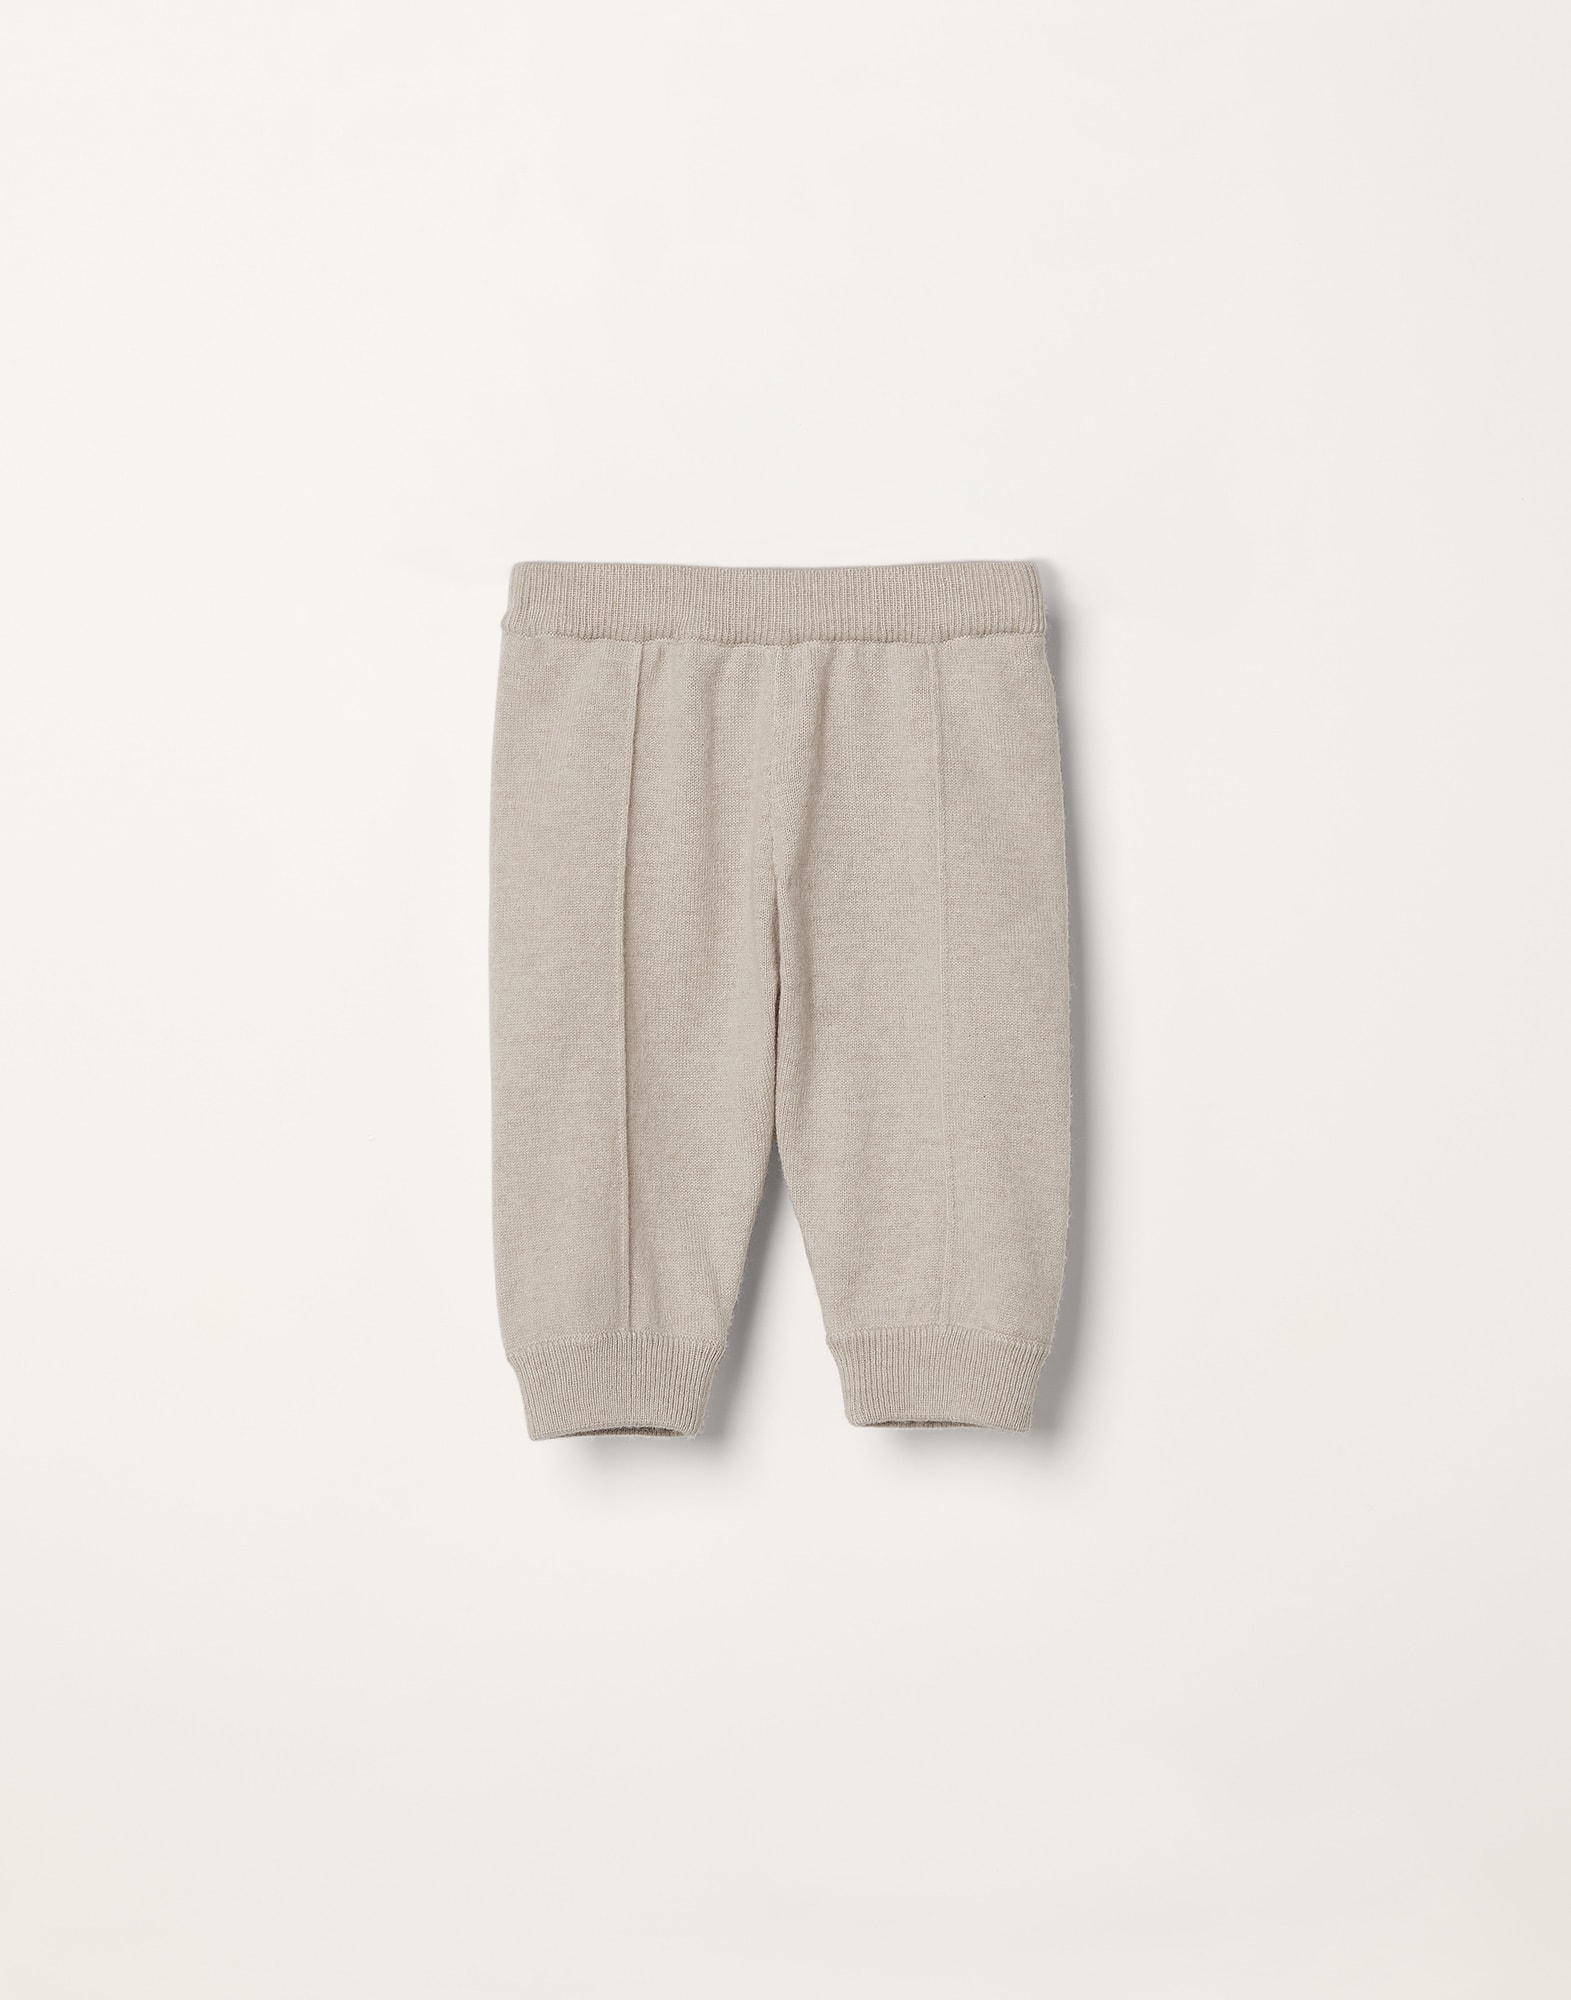 Cashmere knit baby trousers